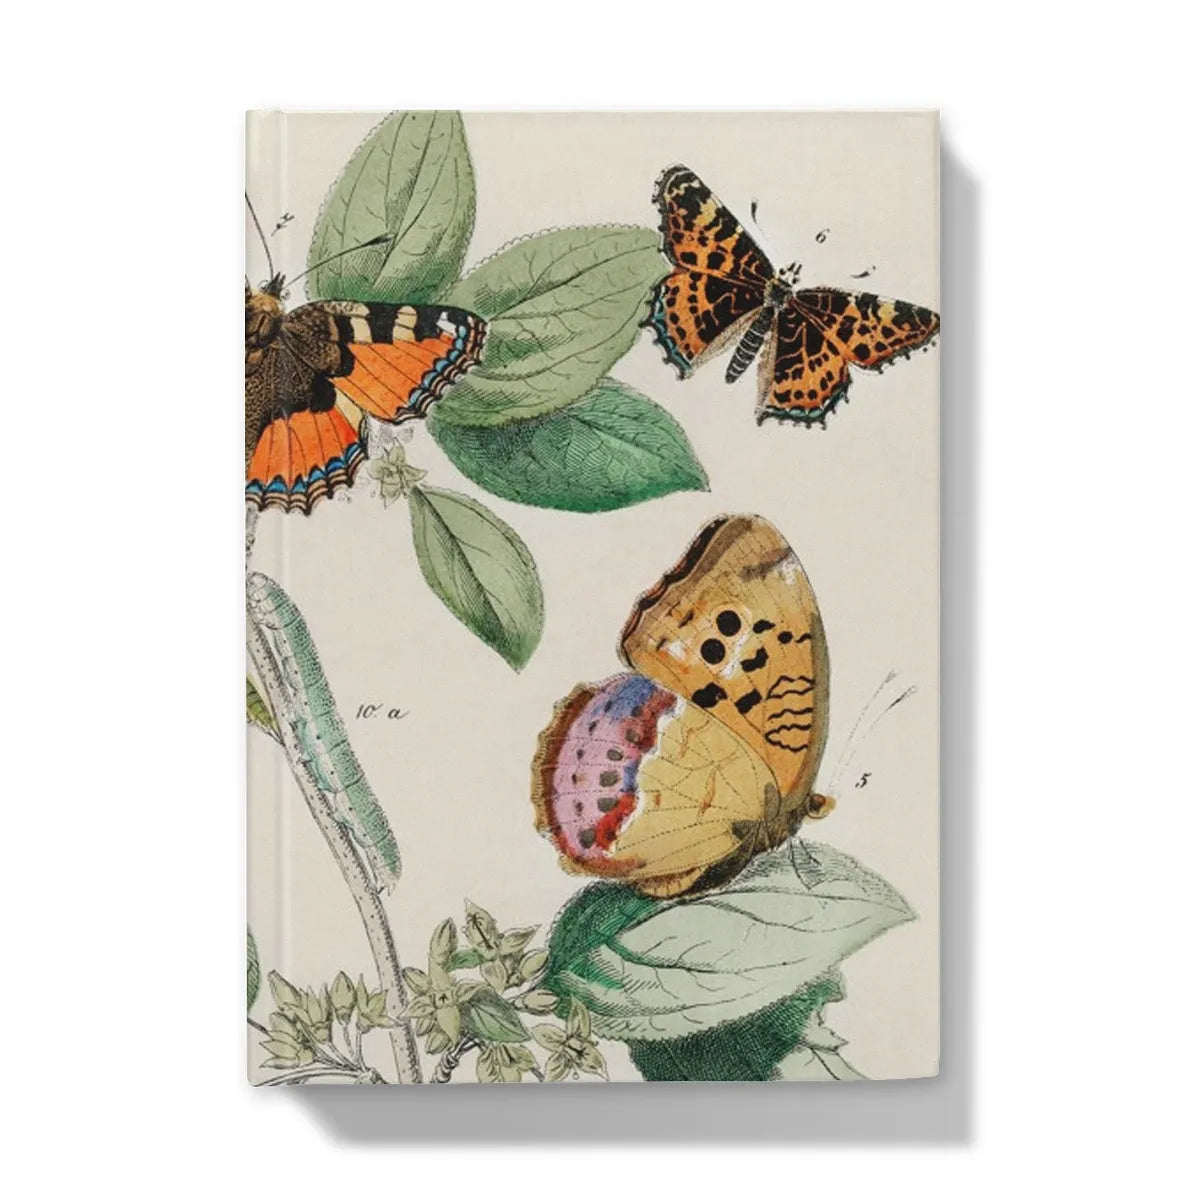 European Butterflies And Moths 3 By William Forsell Kirby Hardback Journal - 5’x7’ / Lined - Notebooks & Notepads